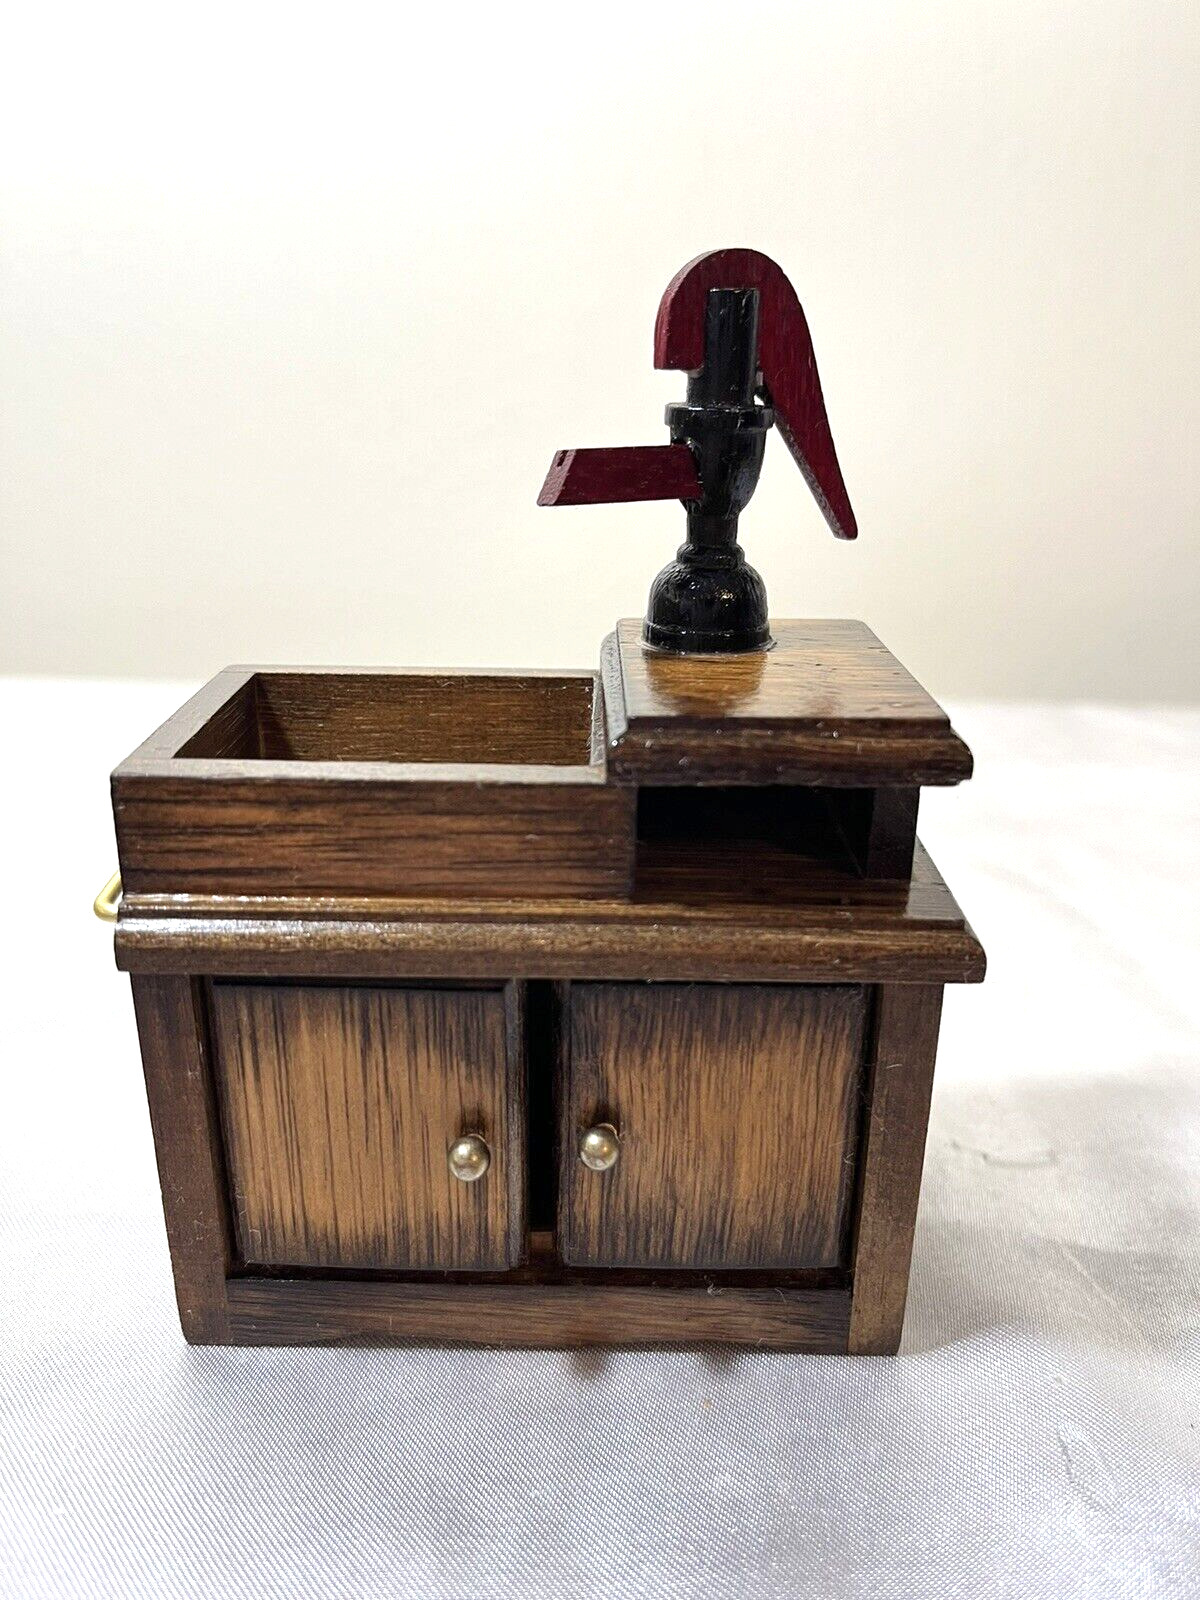 Vintage Rustic Dollhouse Miniature Dry Sink With Pump 1:12 Scale